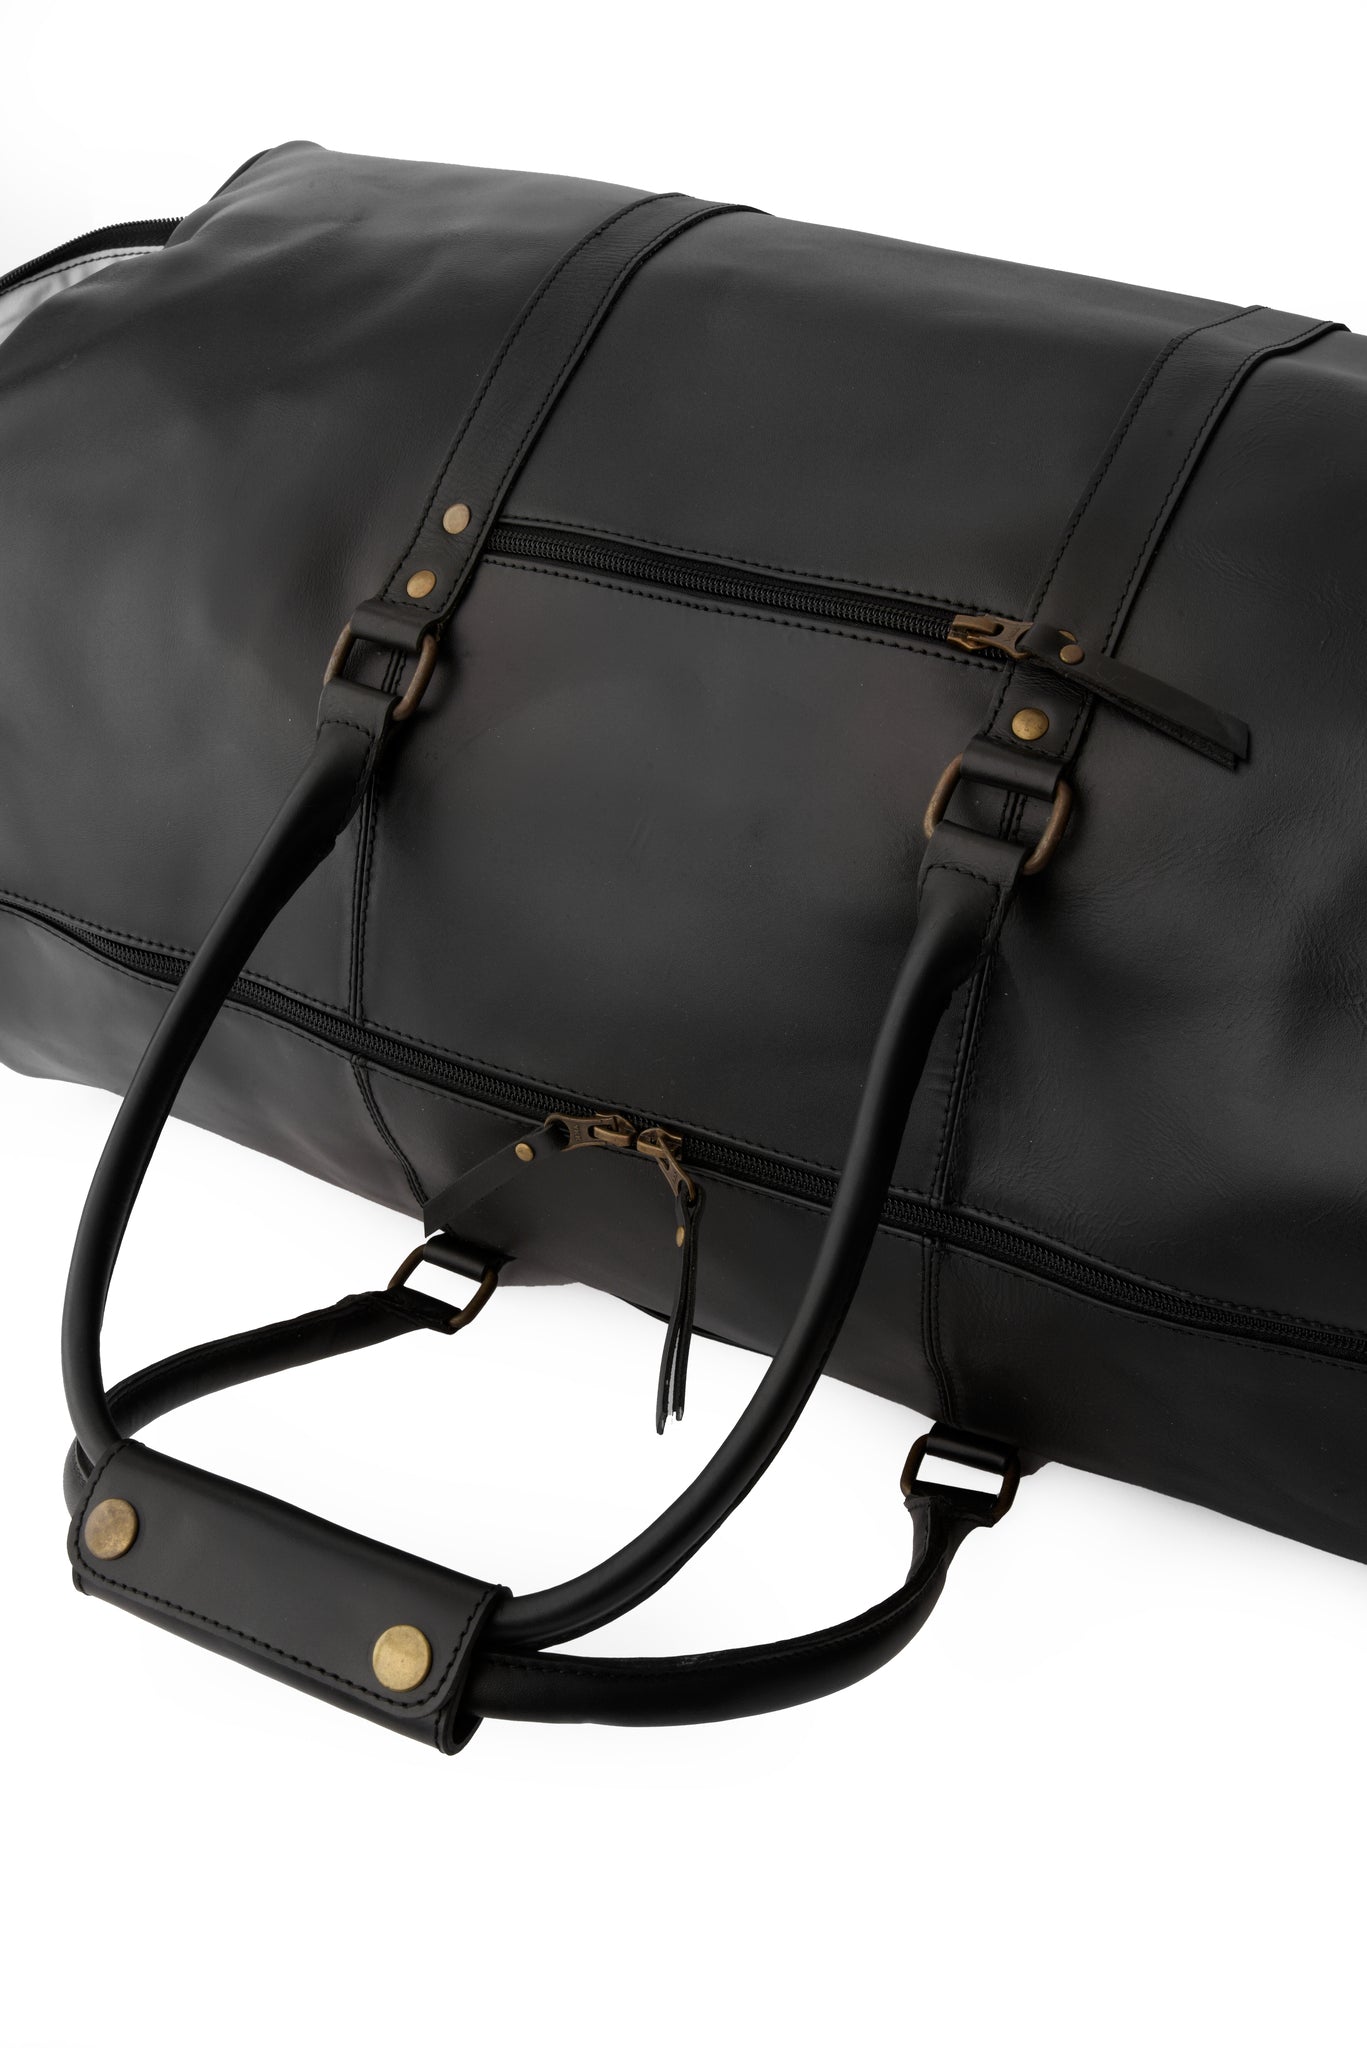 Ajax Leather Duffle Bag with Shoe Compartment